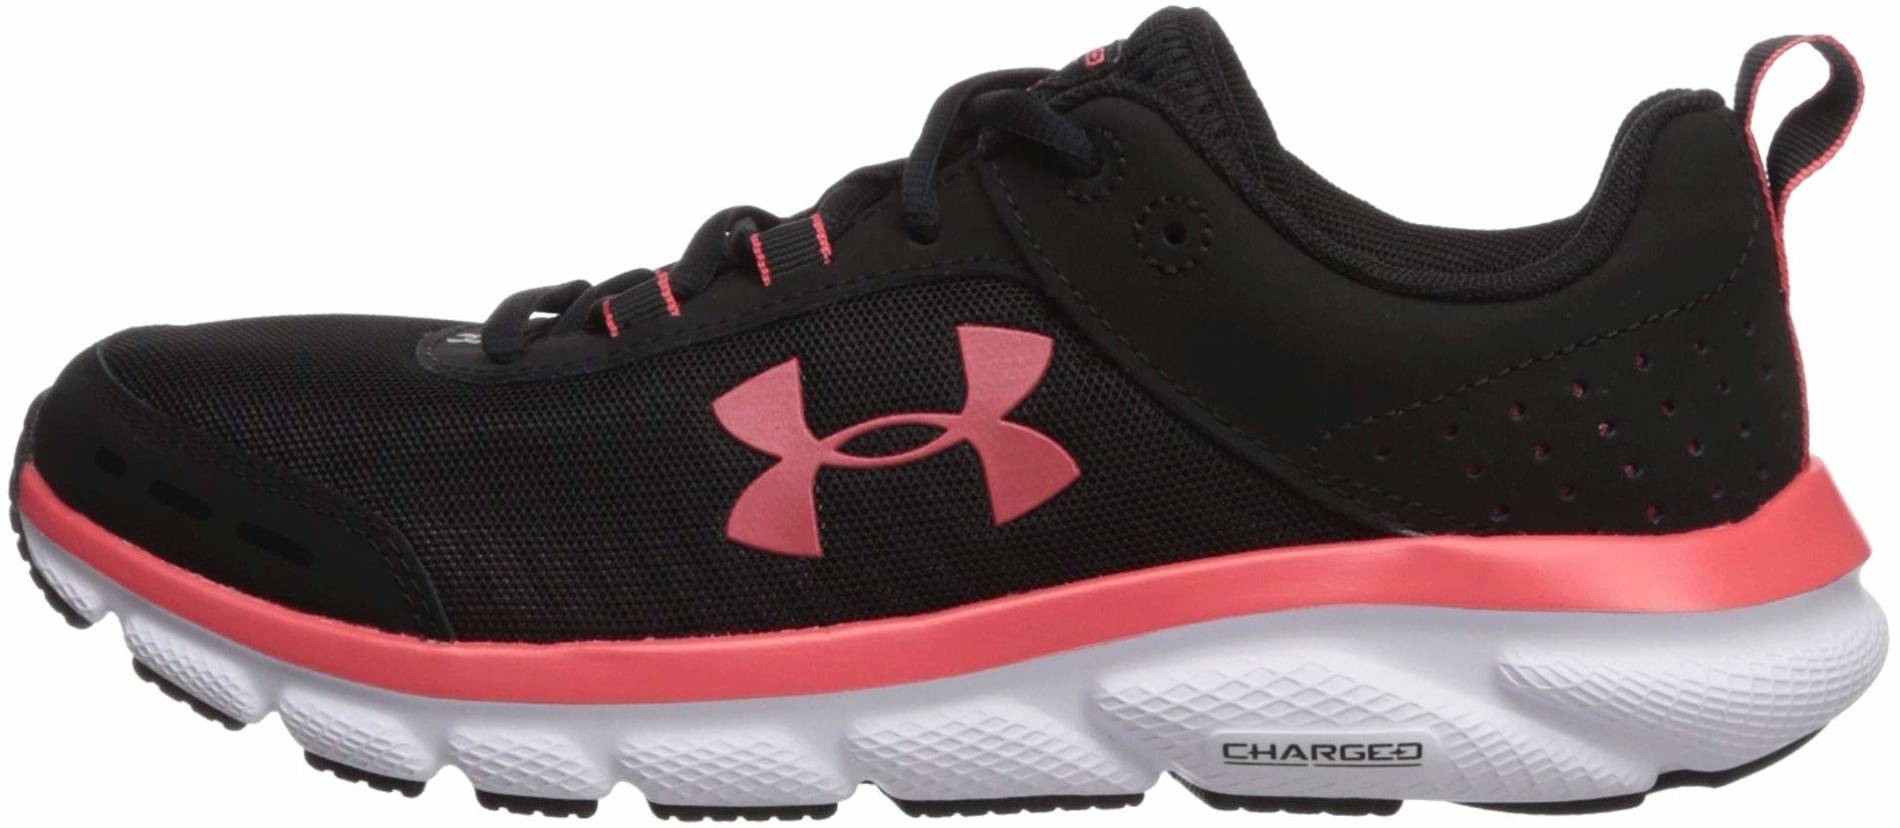 under armour shoes for standing all day